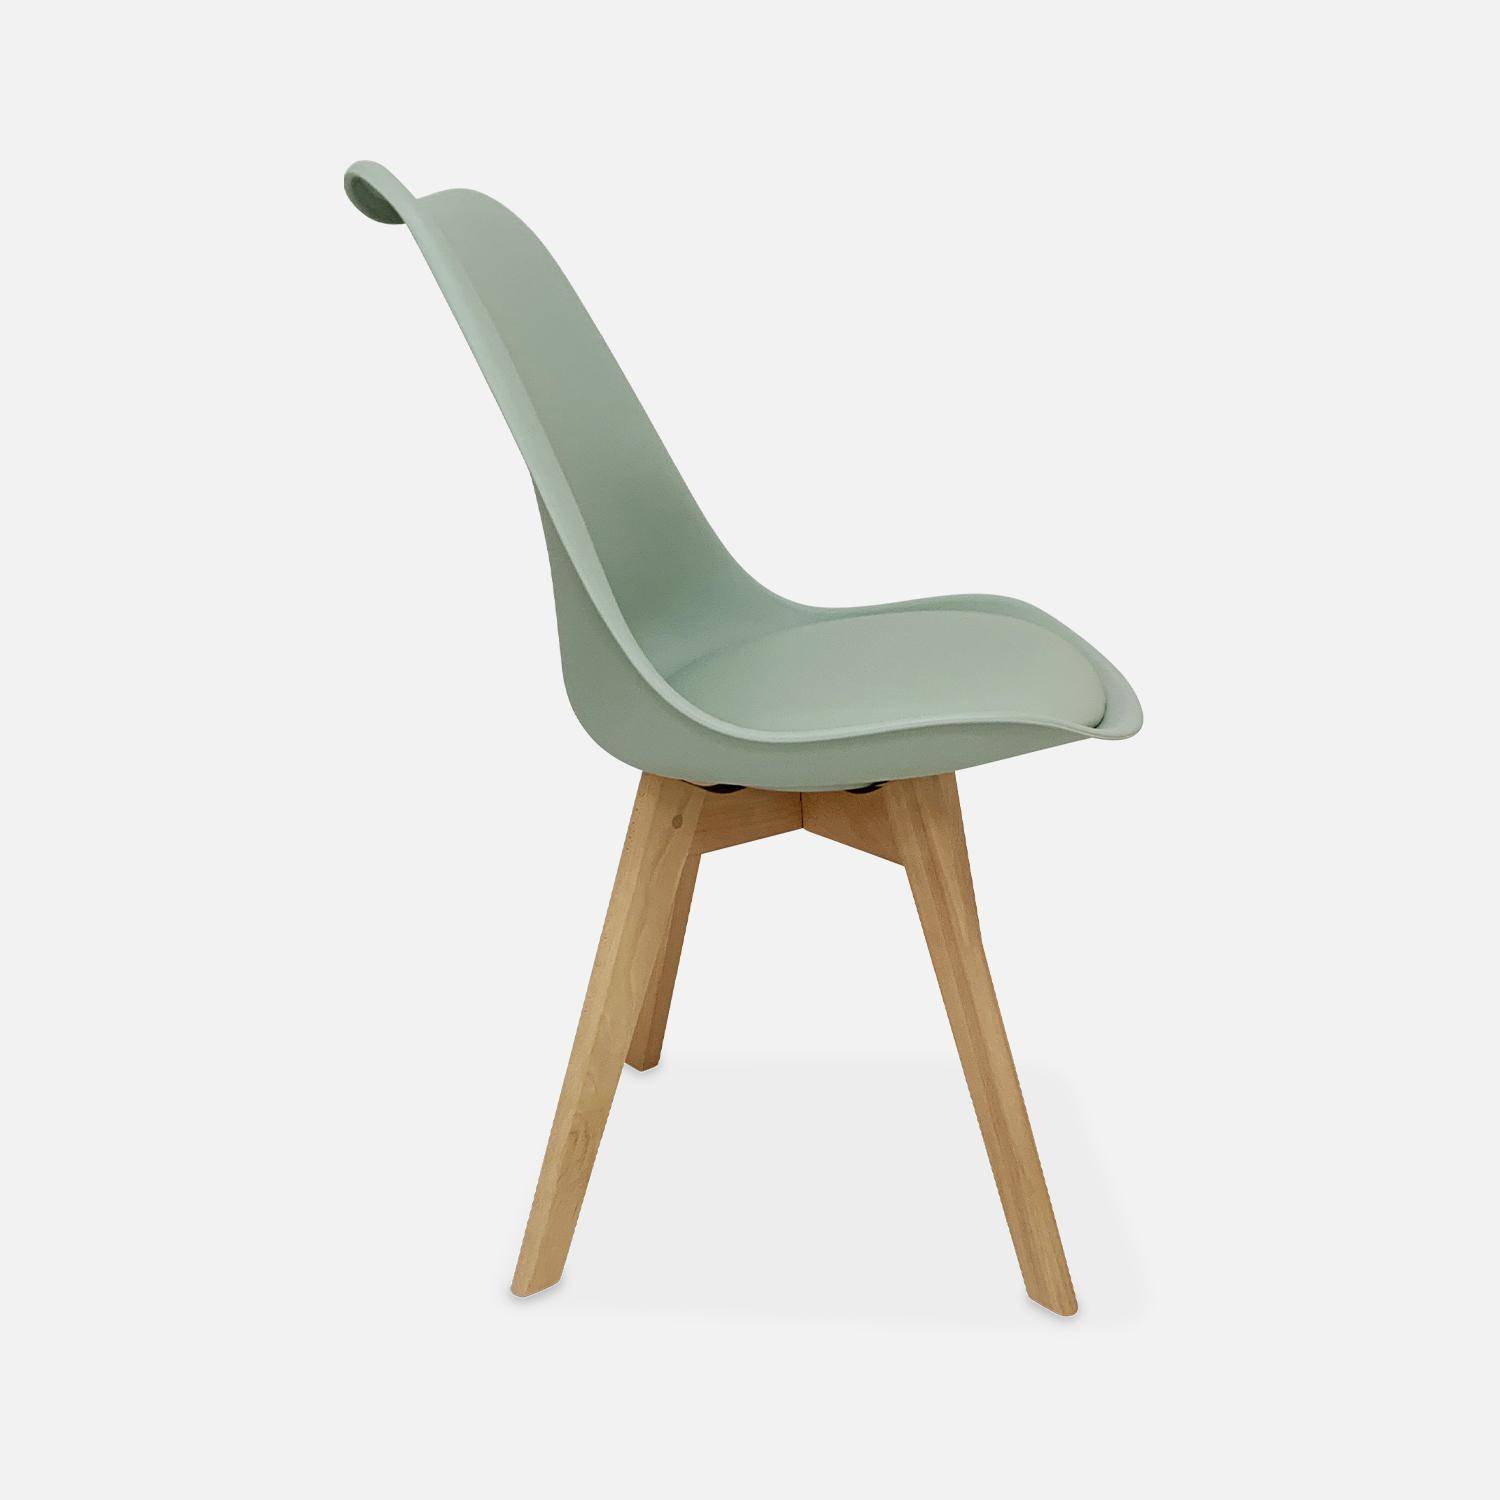 Pair of scandi-style dining chairs, green, L49xD55xH81cm, NILS,sweeek,Photo3